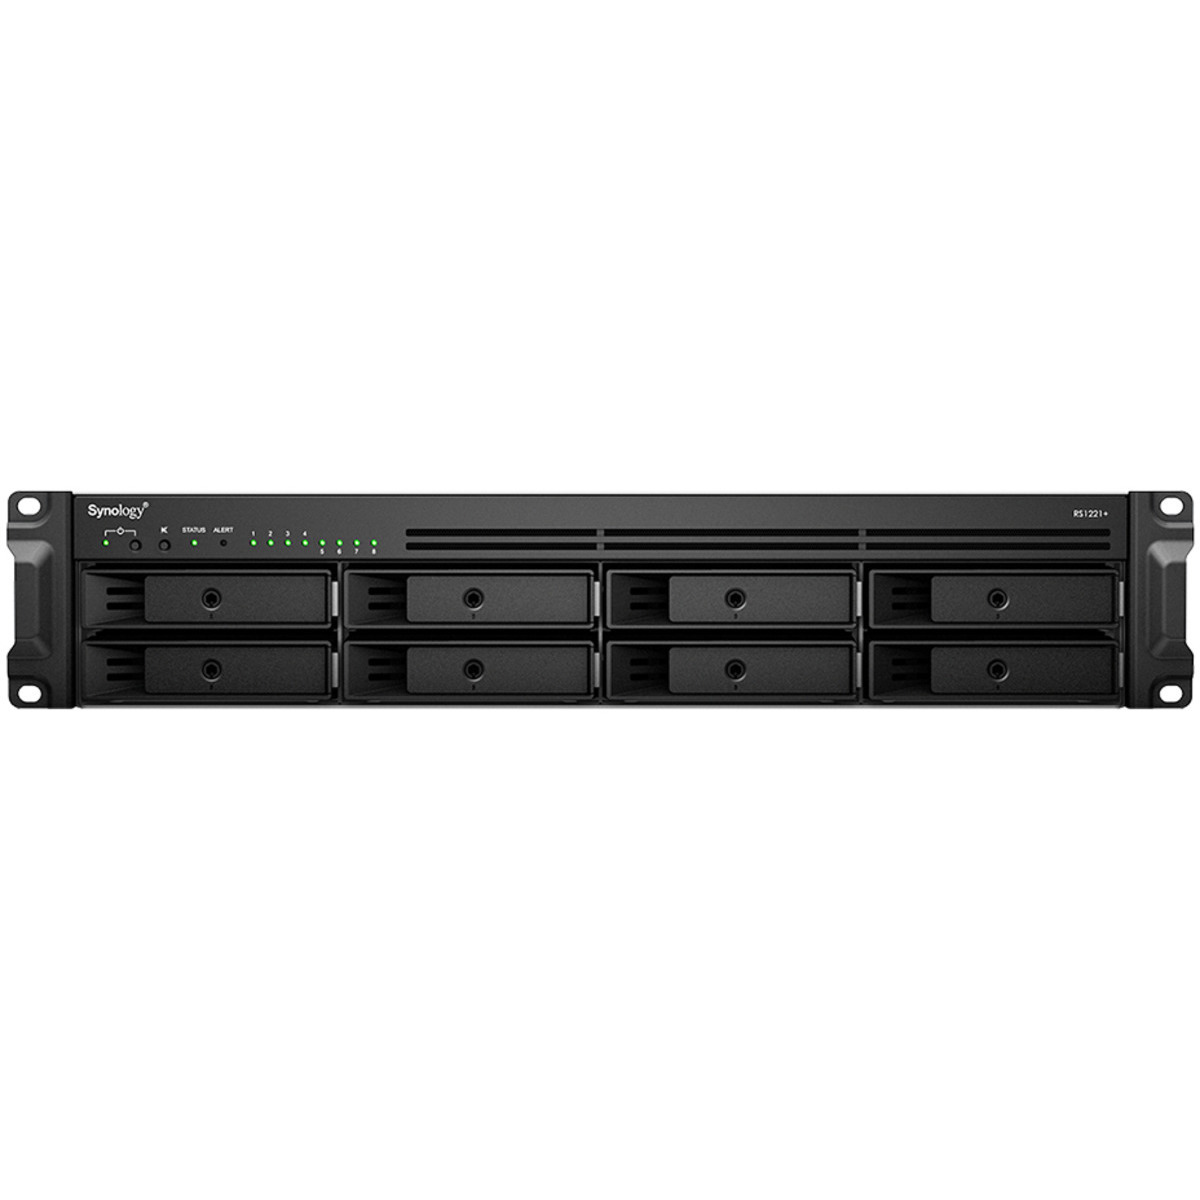 Synology RackStation RS1221+ 112tb 8-Bay RackMount Multimedia / Power User / Business NAS - Network Attached Storage Device 8x14tb Seagate IronWolf Pro ST14000NT001 3.5 7200rpm SATA 6Gb/s HDD NAS Class Drives Installed - Burn-In Tested RackStation RS1221+